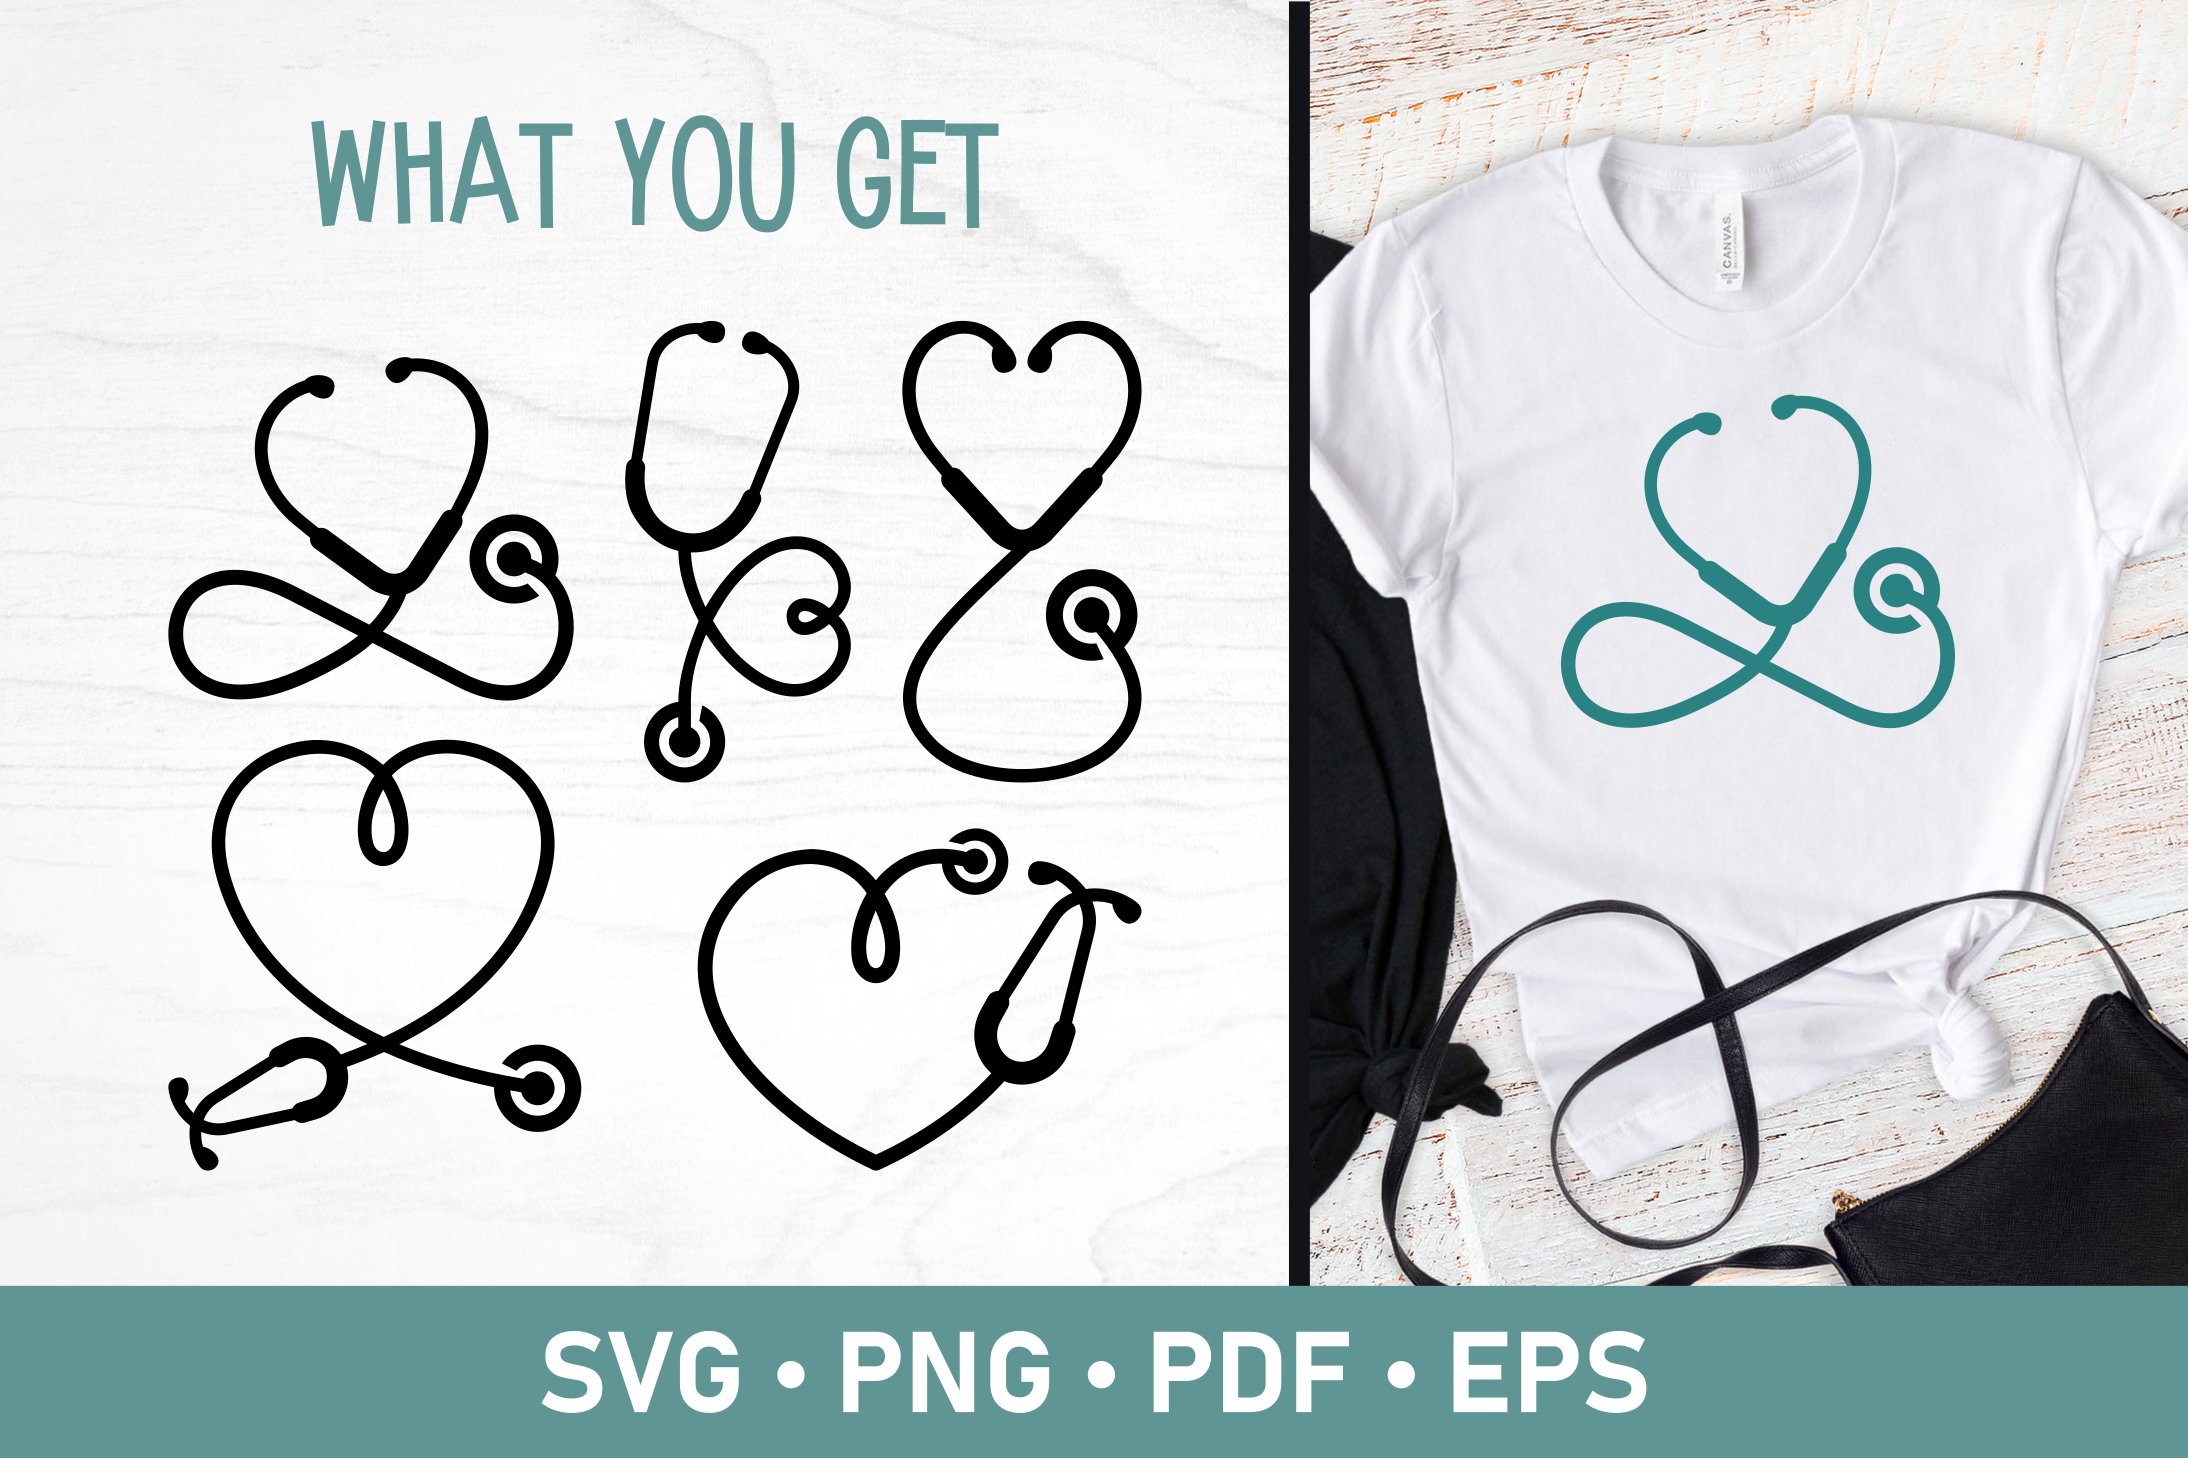 Use this Stethoscope set on the different textures.